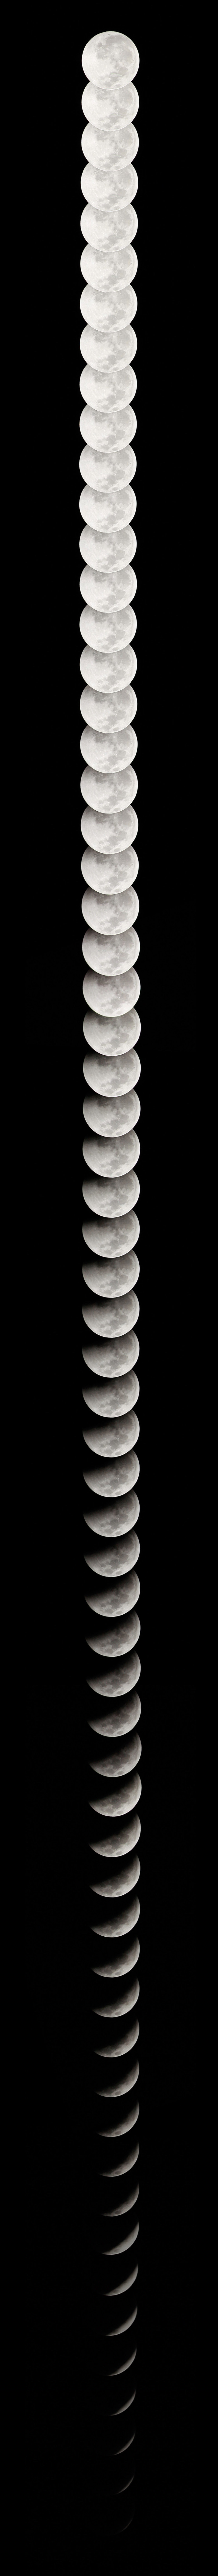 time-lapse photo of lunar eclipse